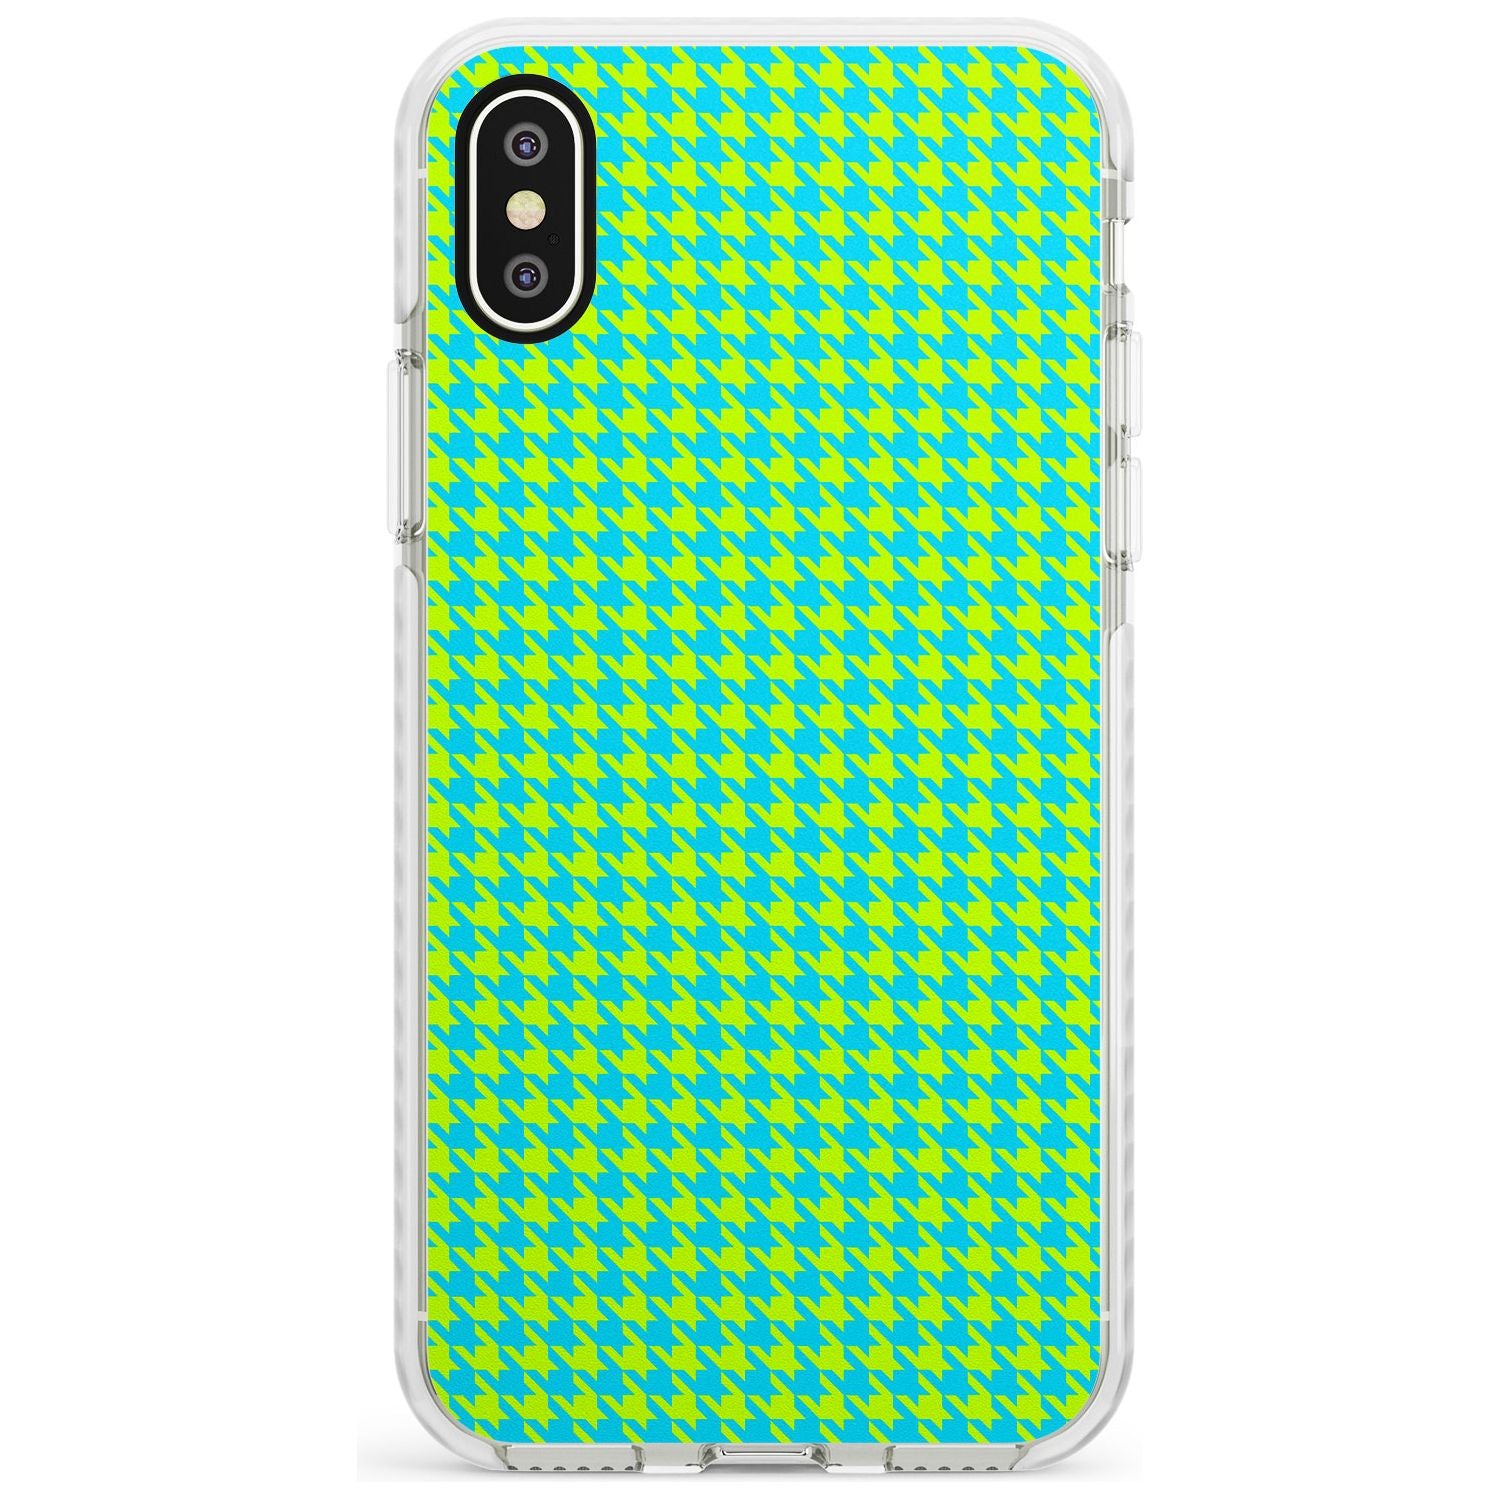 Neon Lime & Turquoise Houndstooth Pattern Impact Phone Case for iPhone X XS Max XR